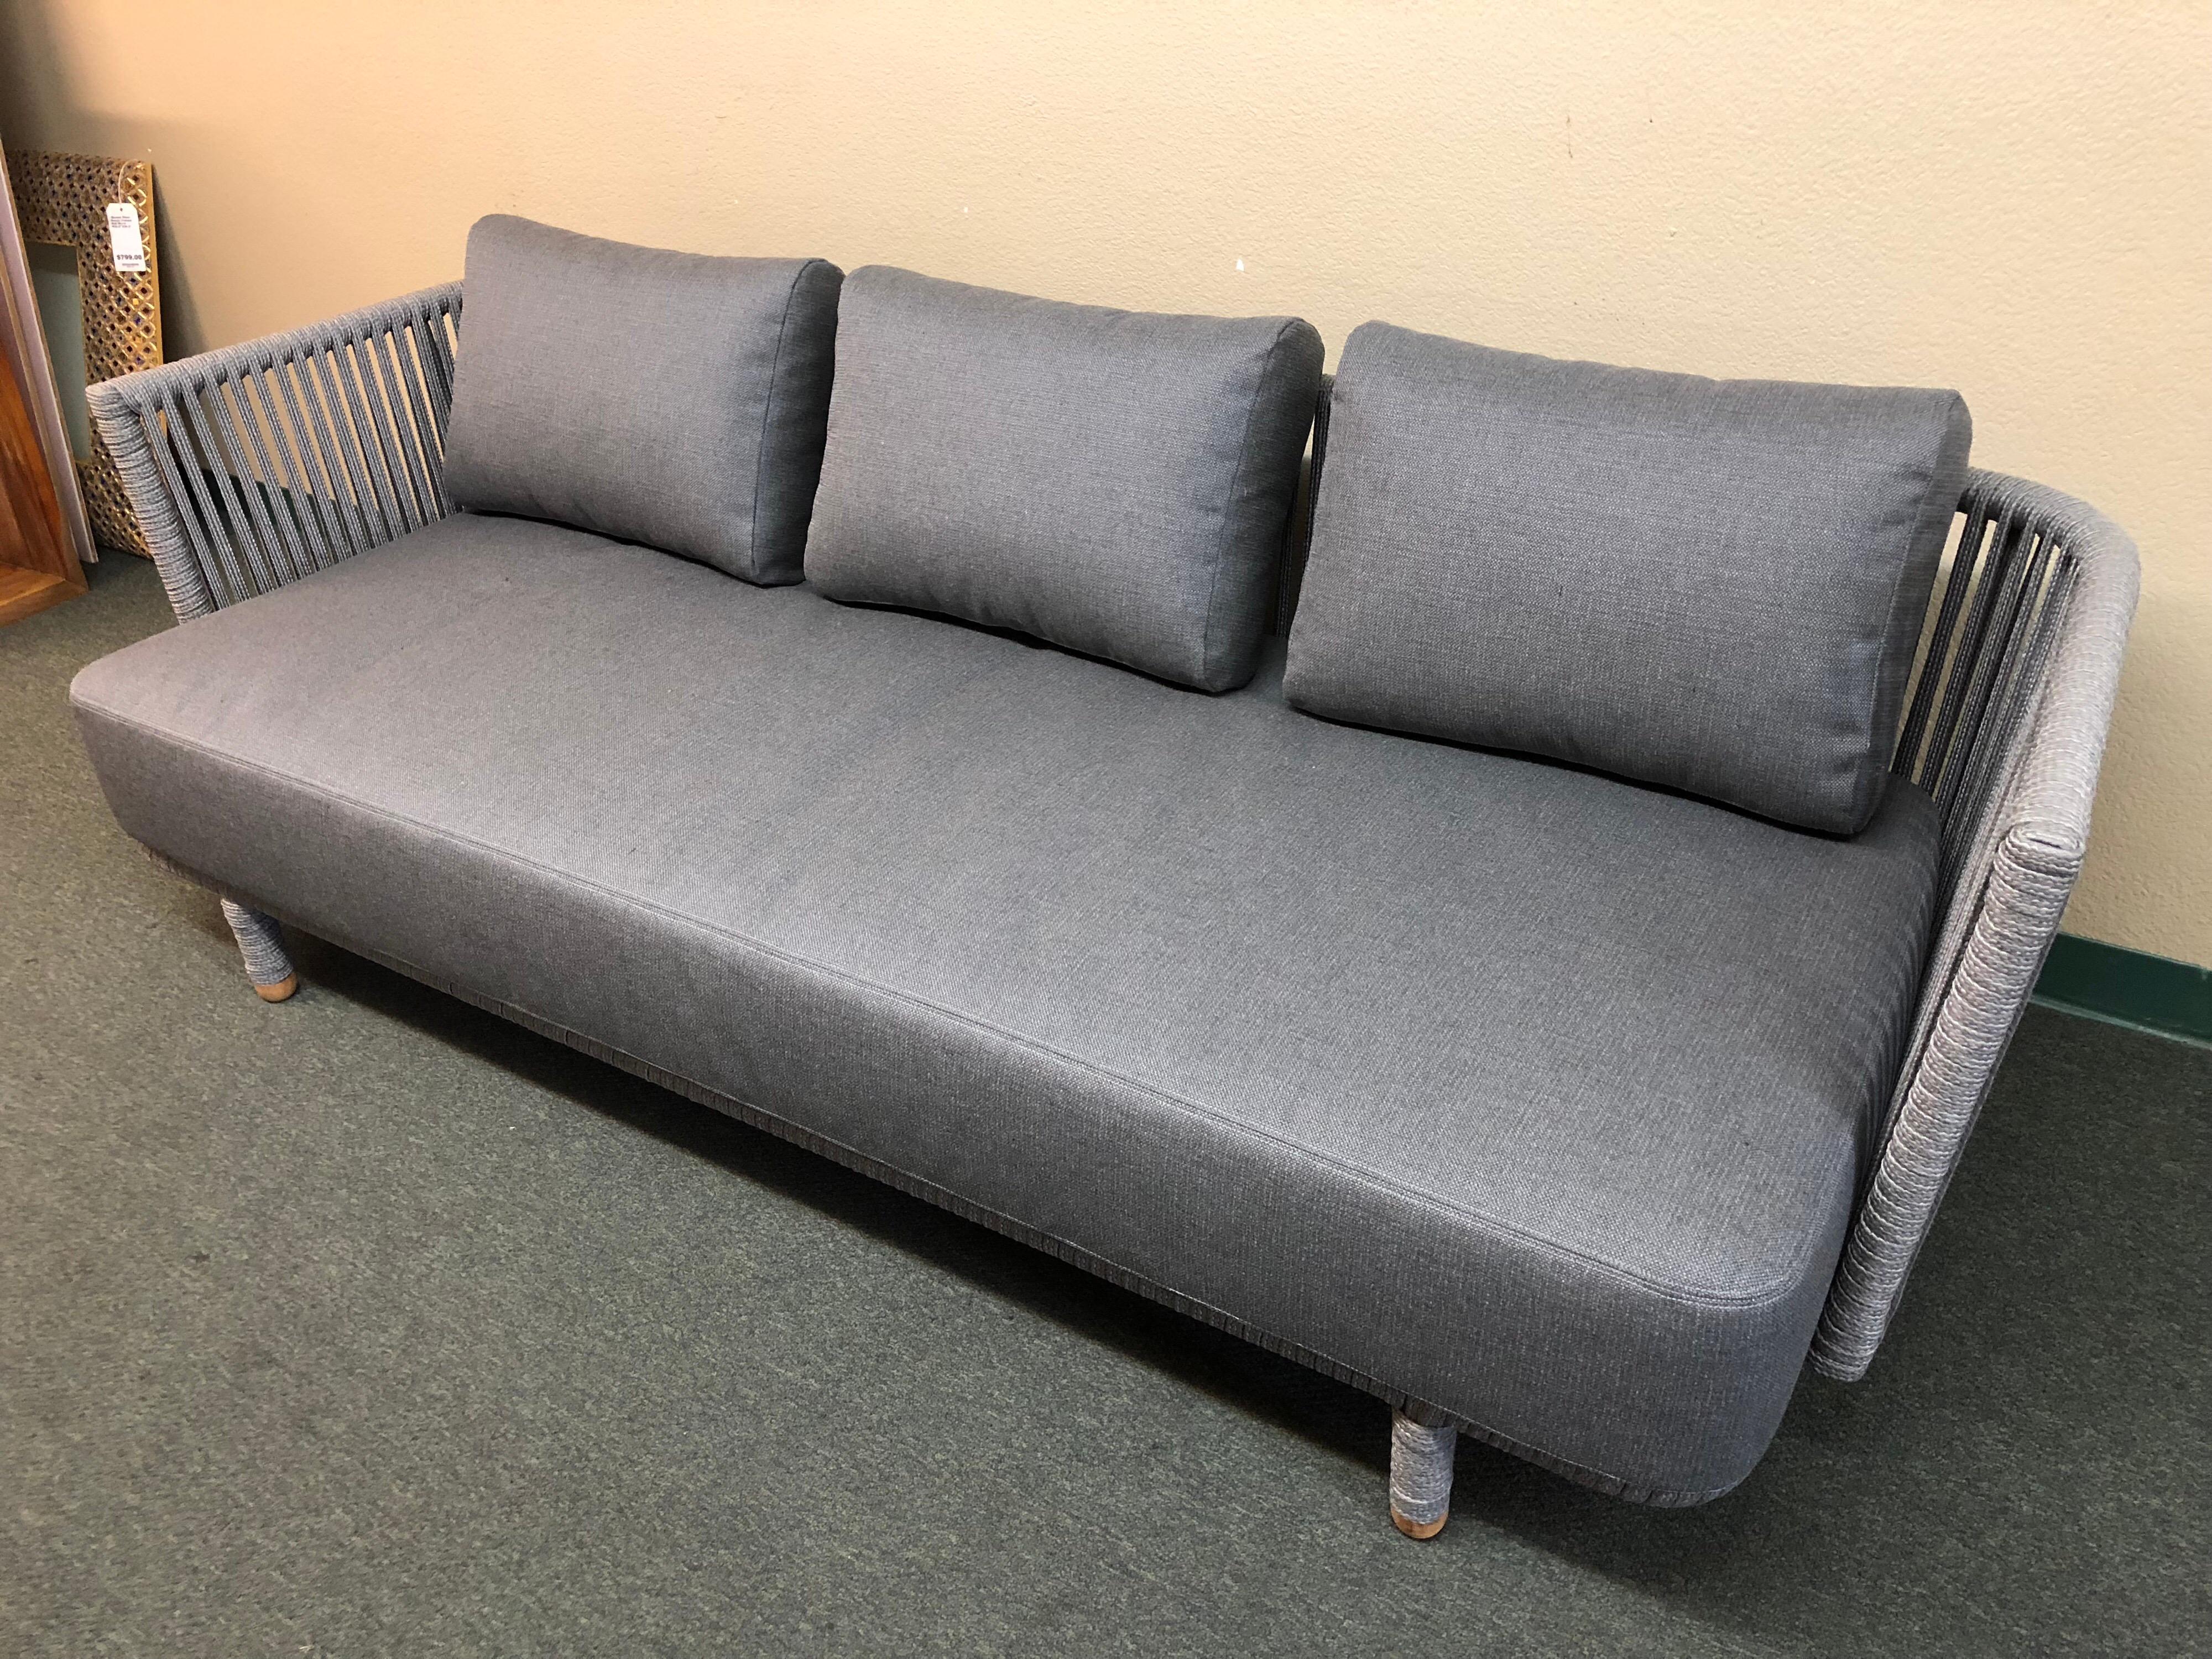 A Moments sofa by Cane-tine. This unique design includes a frame made of a weatherproof synthetic material that feels like rope, in a multihued gray. The comfy bench cushion and loose cushions come in a coordinating grey soft touch fabric, with